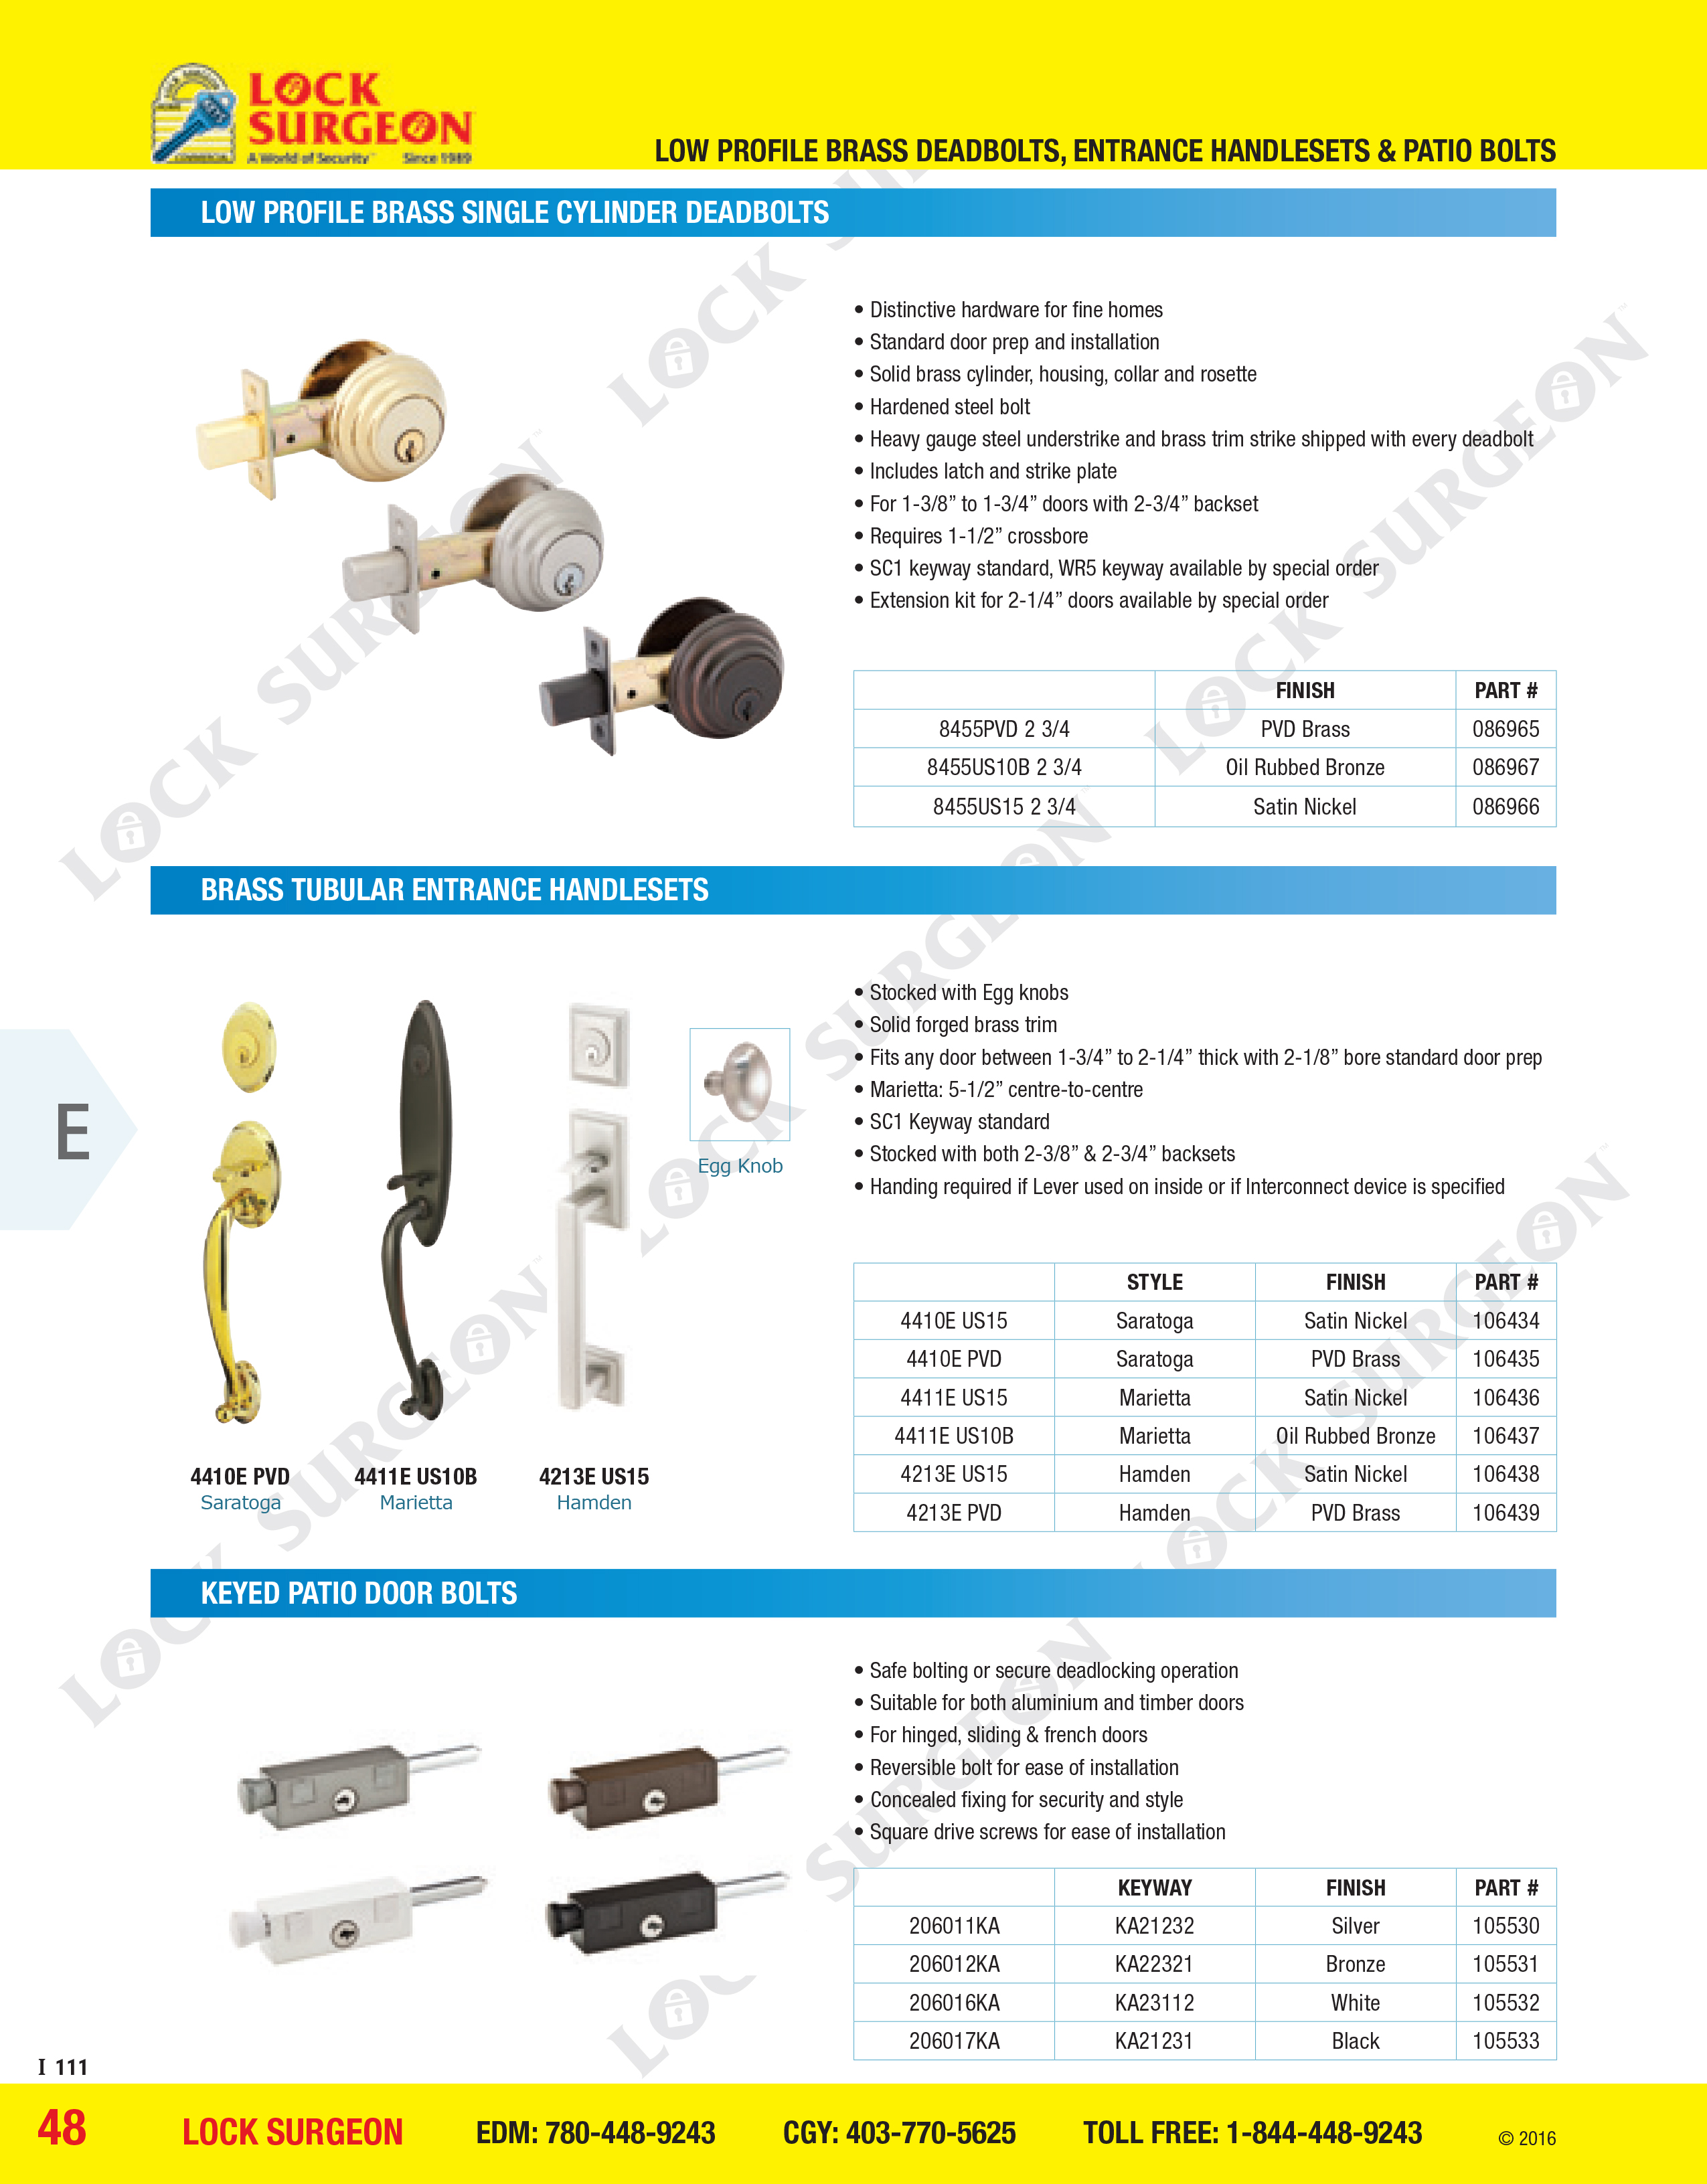 Residential Schlage deadbolts and grip-sets and patio door locking bolts.